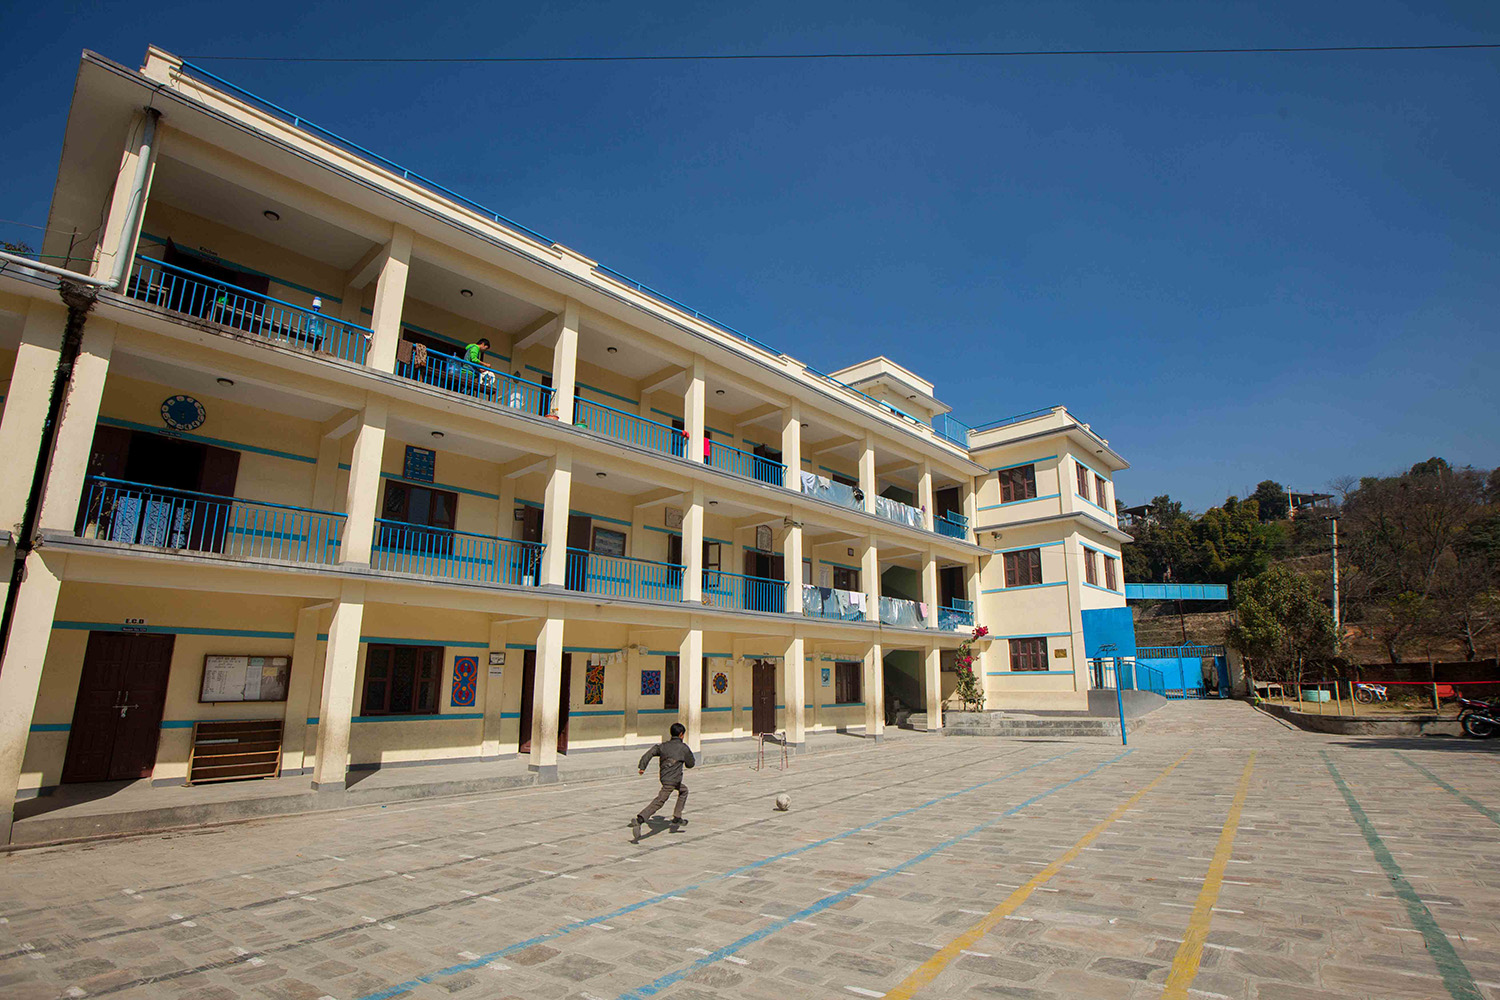 Besides classrooms, there is a dormitory and a courtyard where students get to play